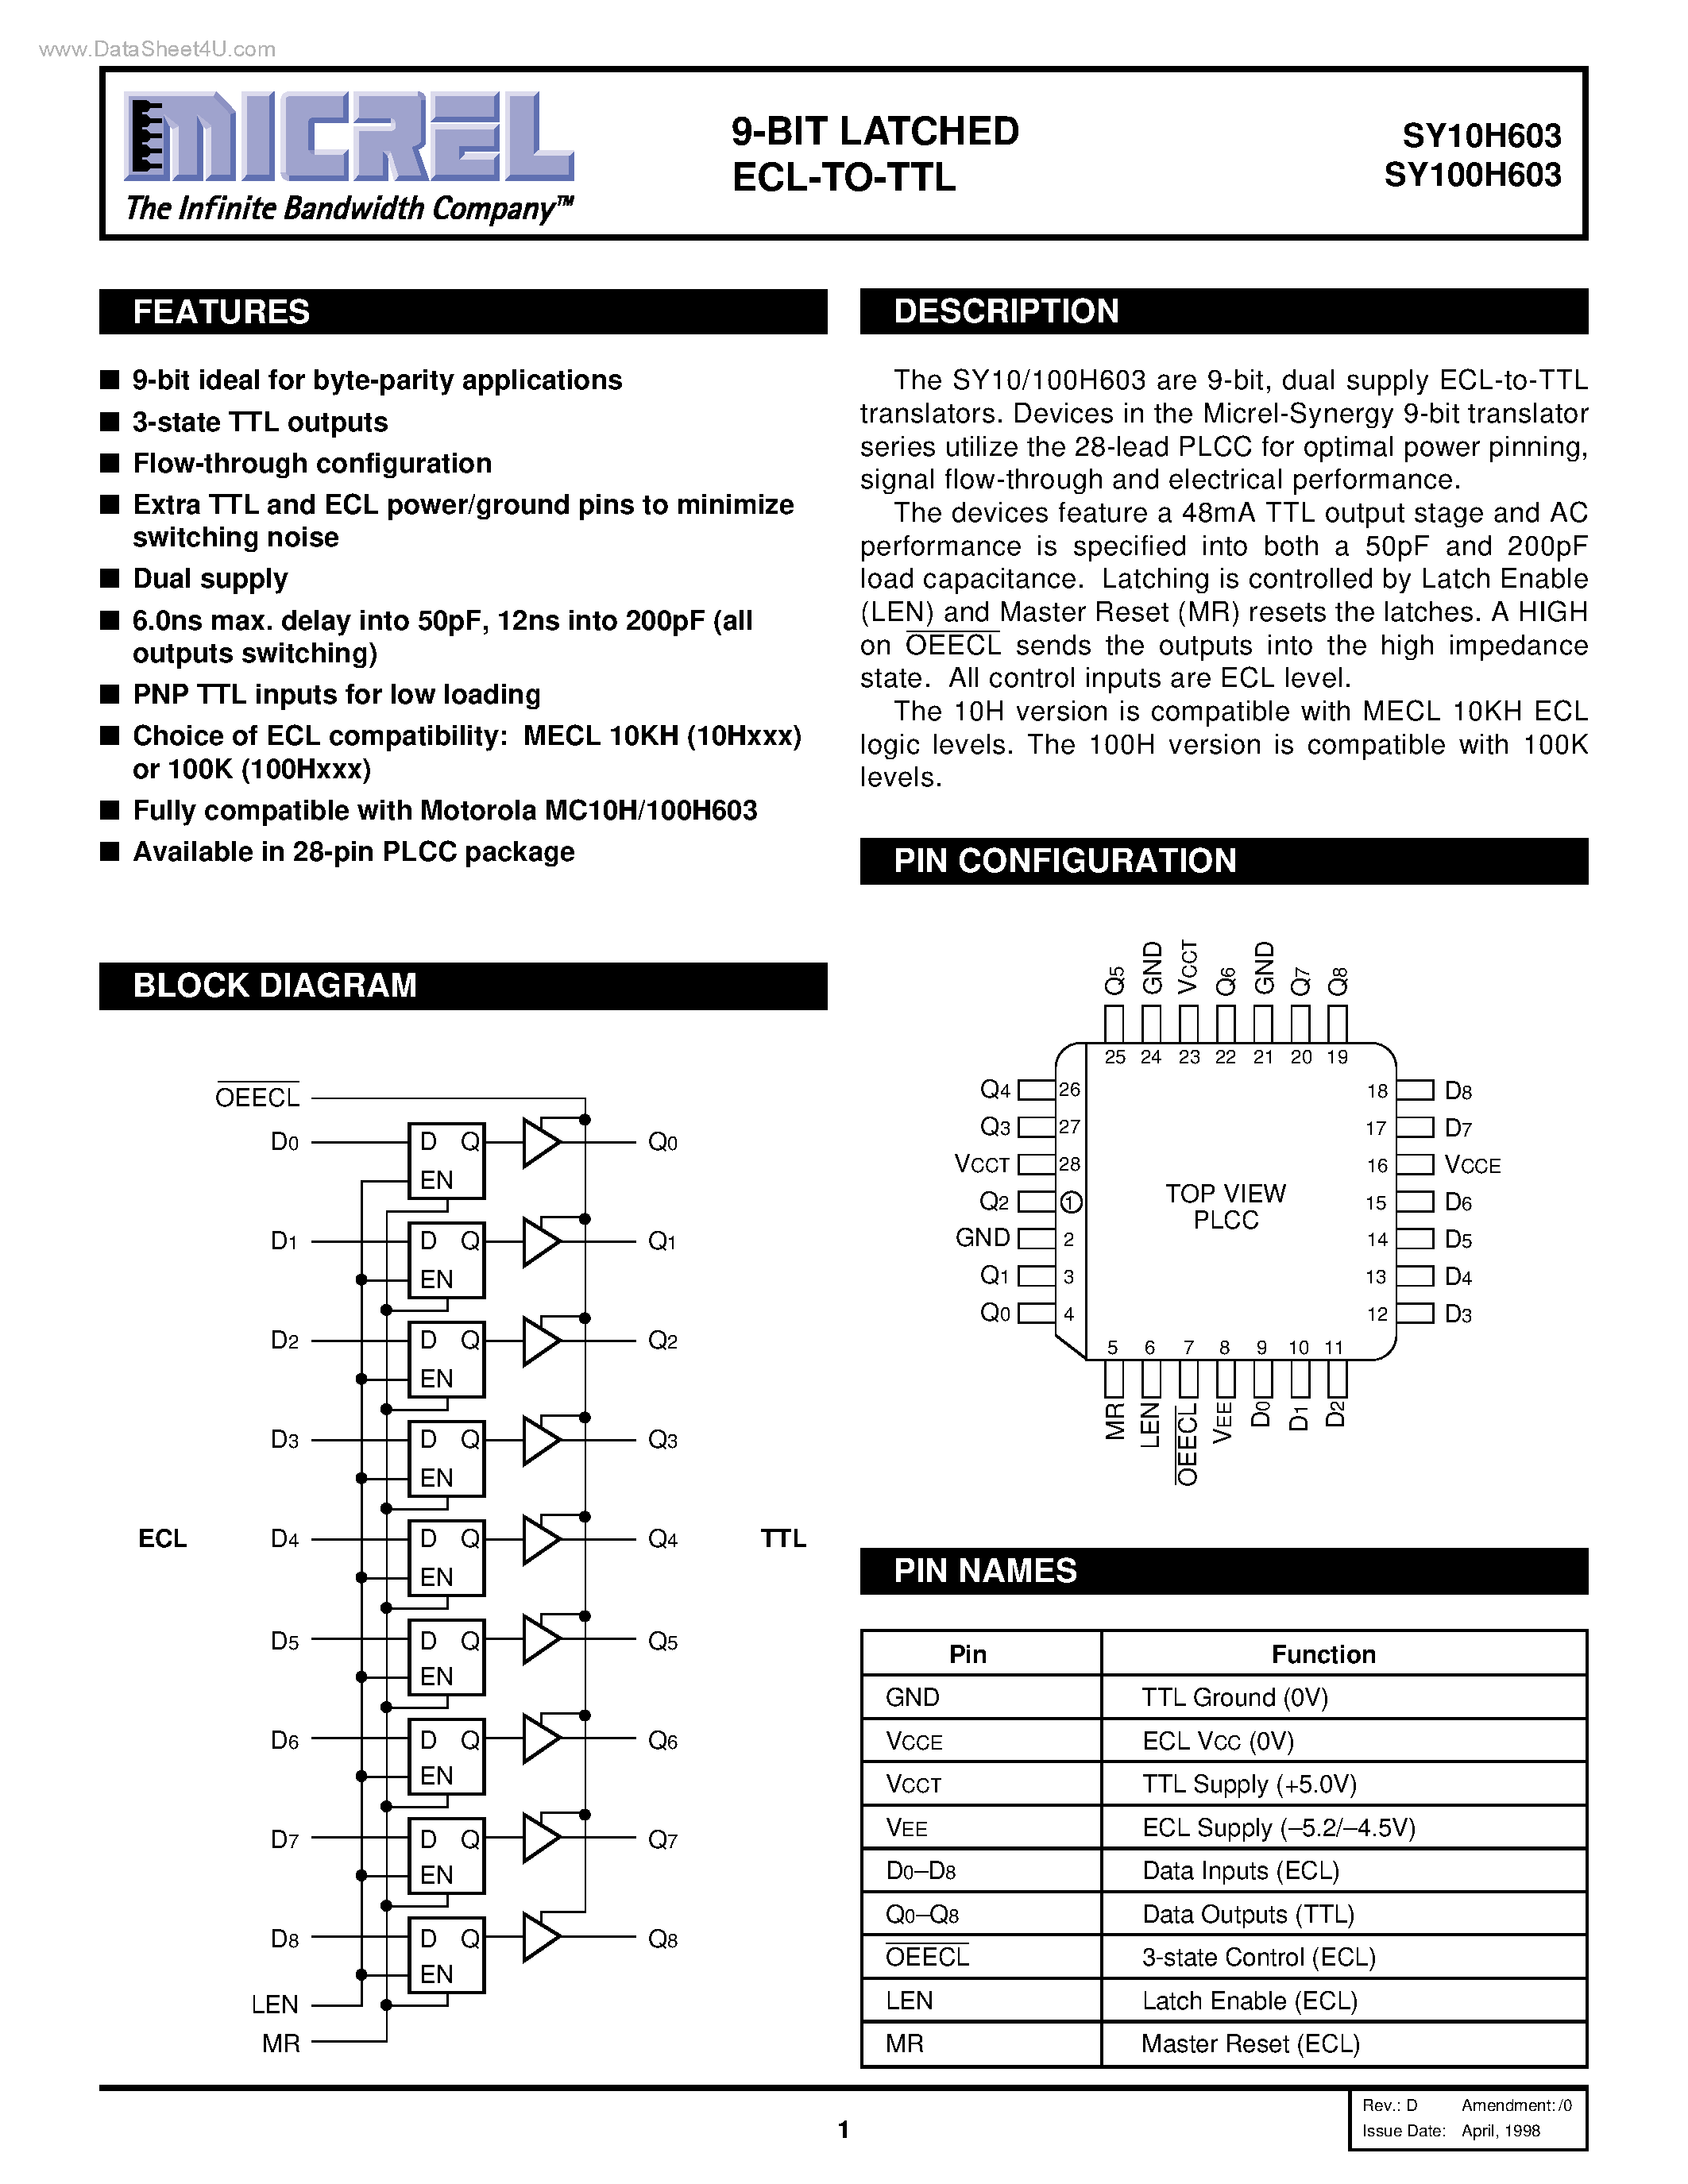 Datasheet SY100H603 - 9-BIT LATCHED ECL-TO-TTL page 1